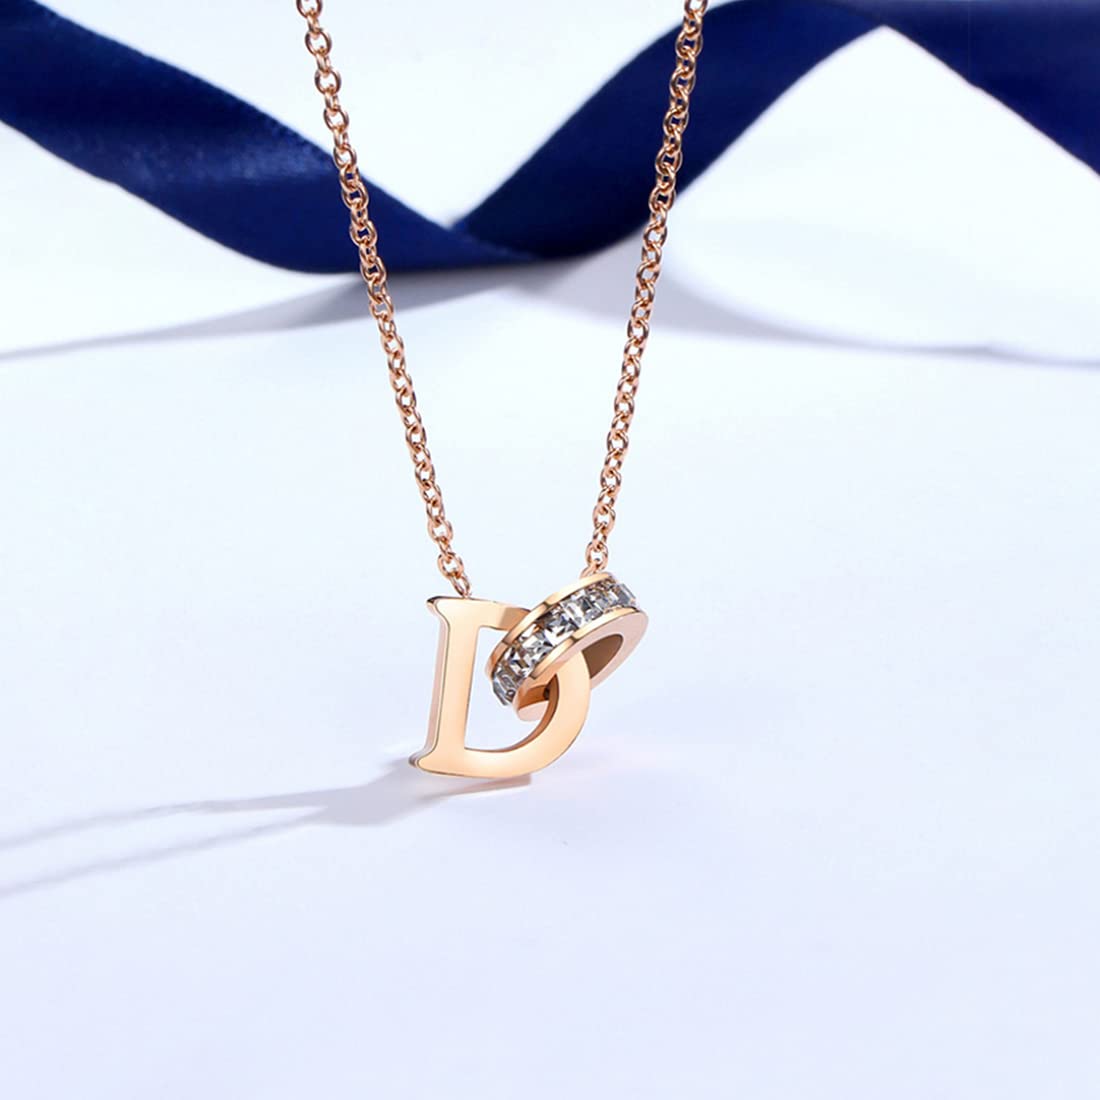 Yellow Chimes Pendant for Women Pendant With Rose Gold Plated Stainless Steel Chain Pendant Necklace for Women and Girls. (NK 4)